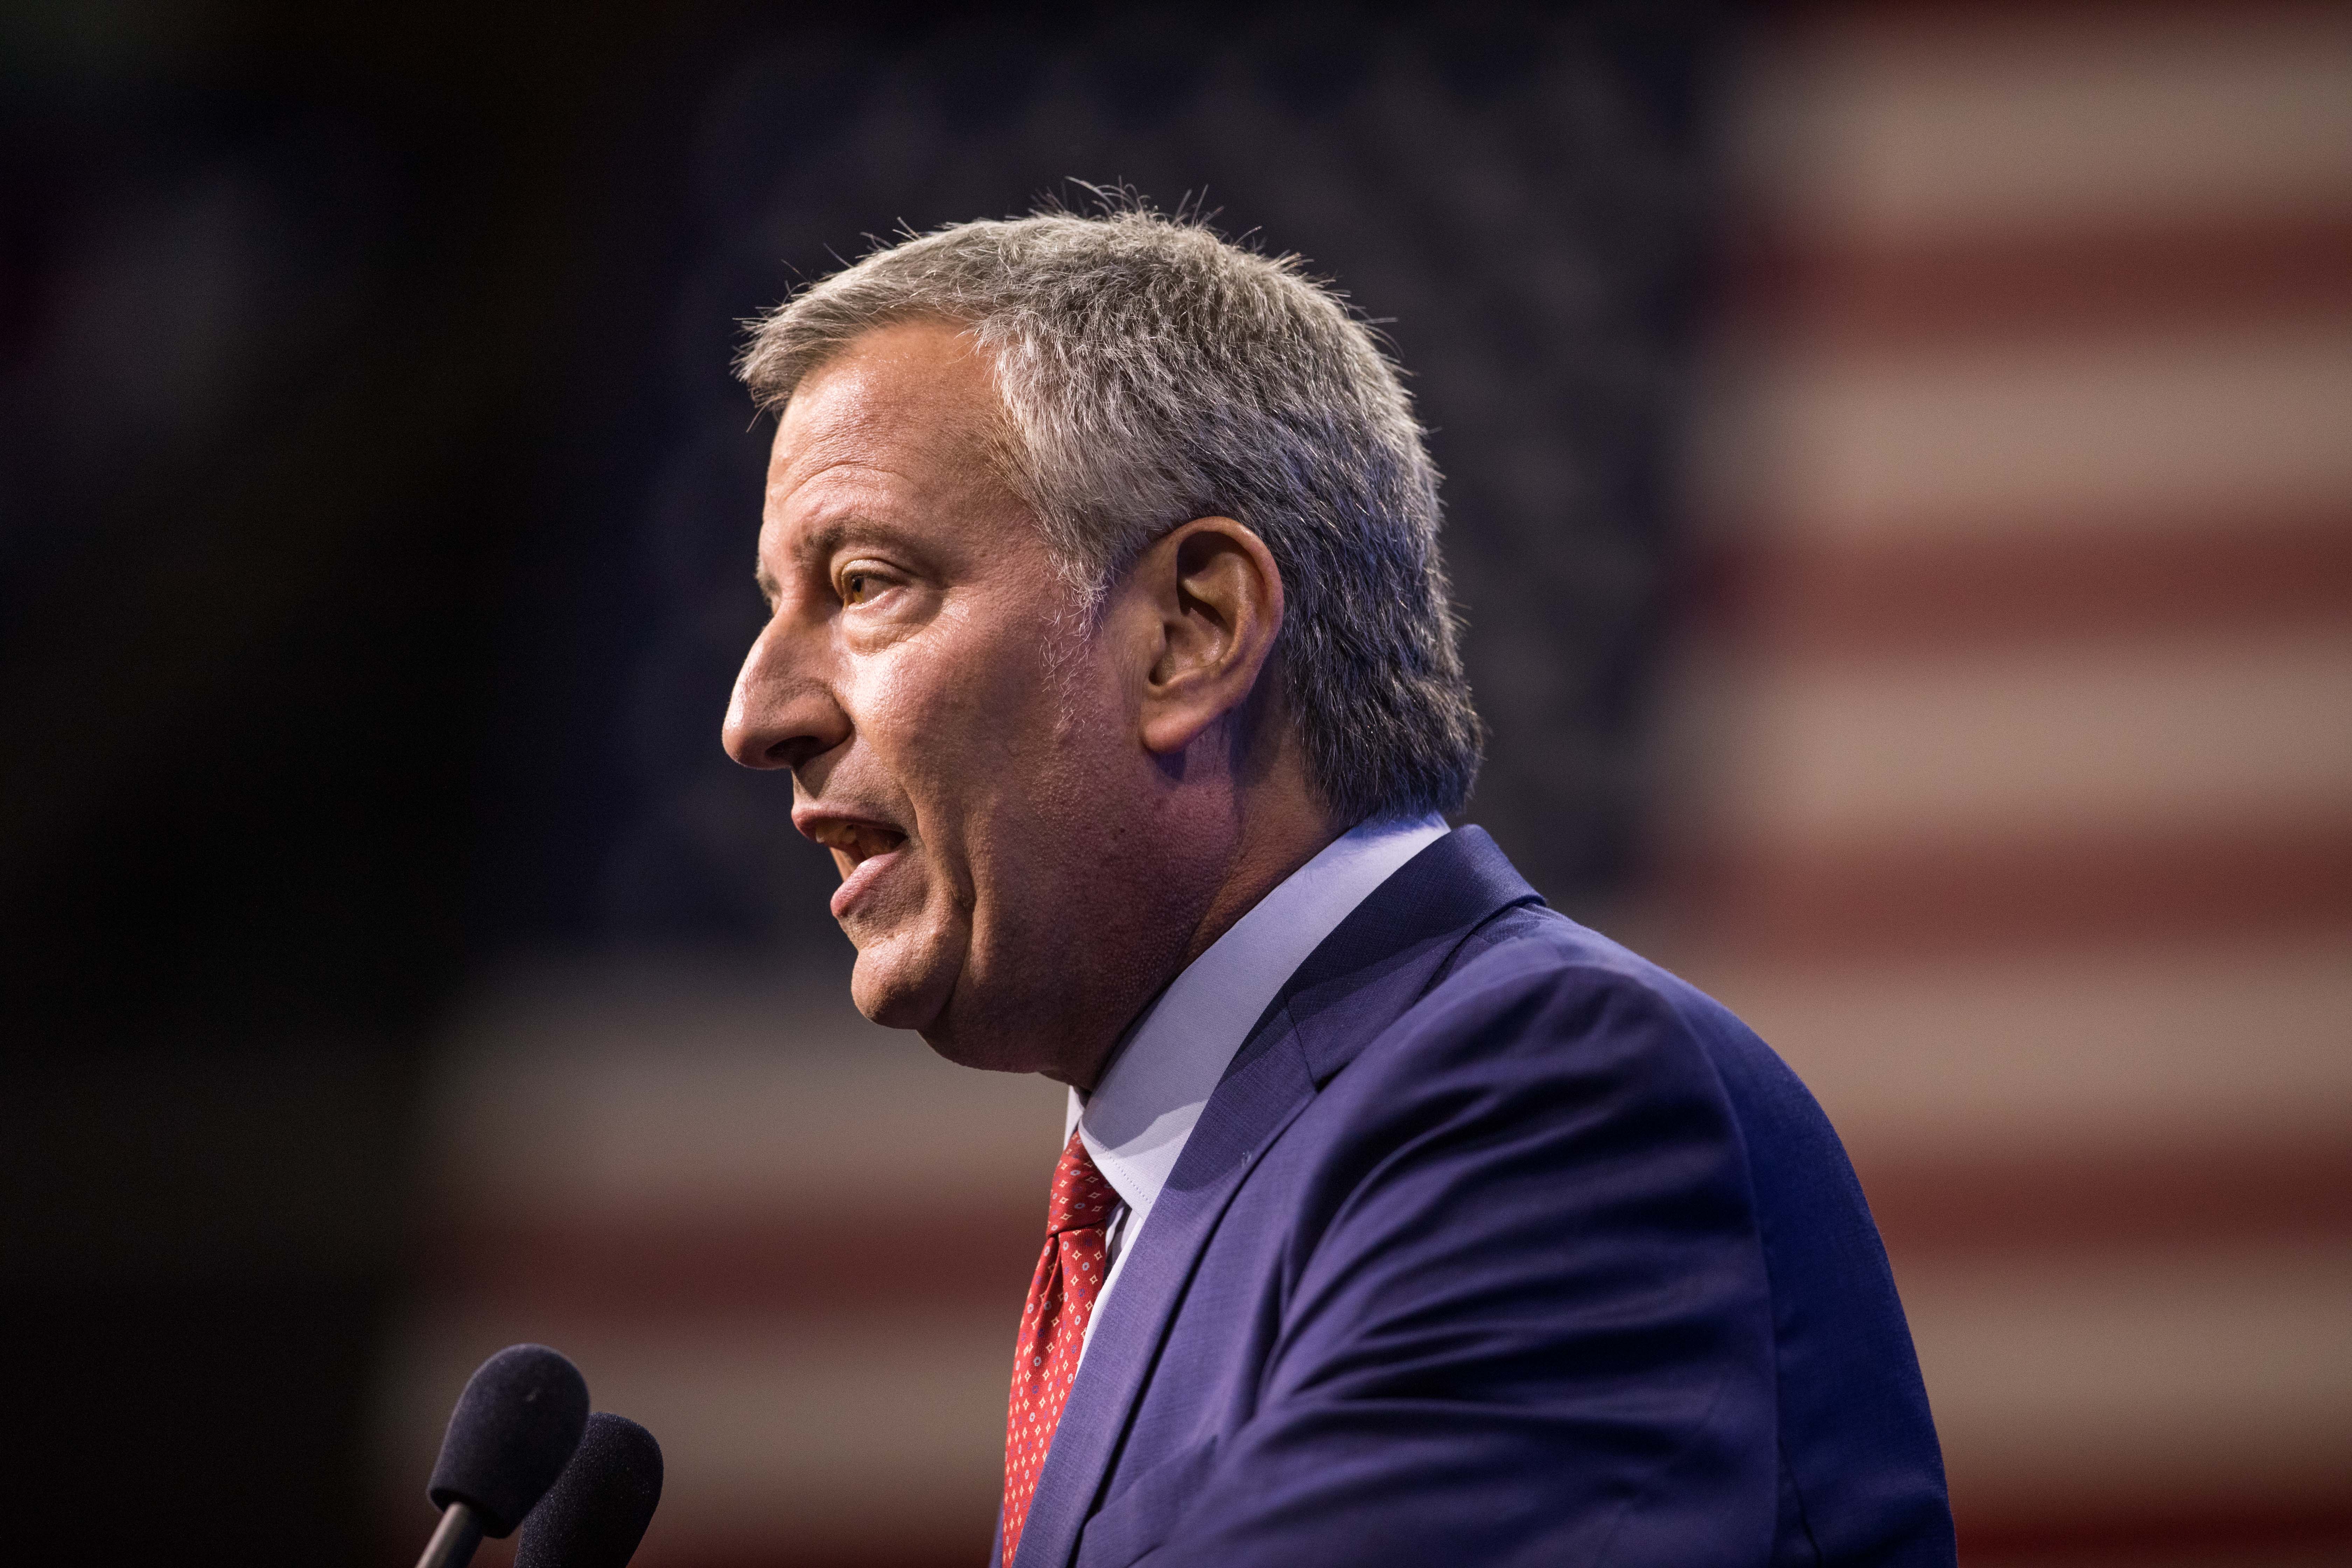 New York City Mayor Bill de Blasio speaks at a Democratic Party Convention in New Hampshire.